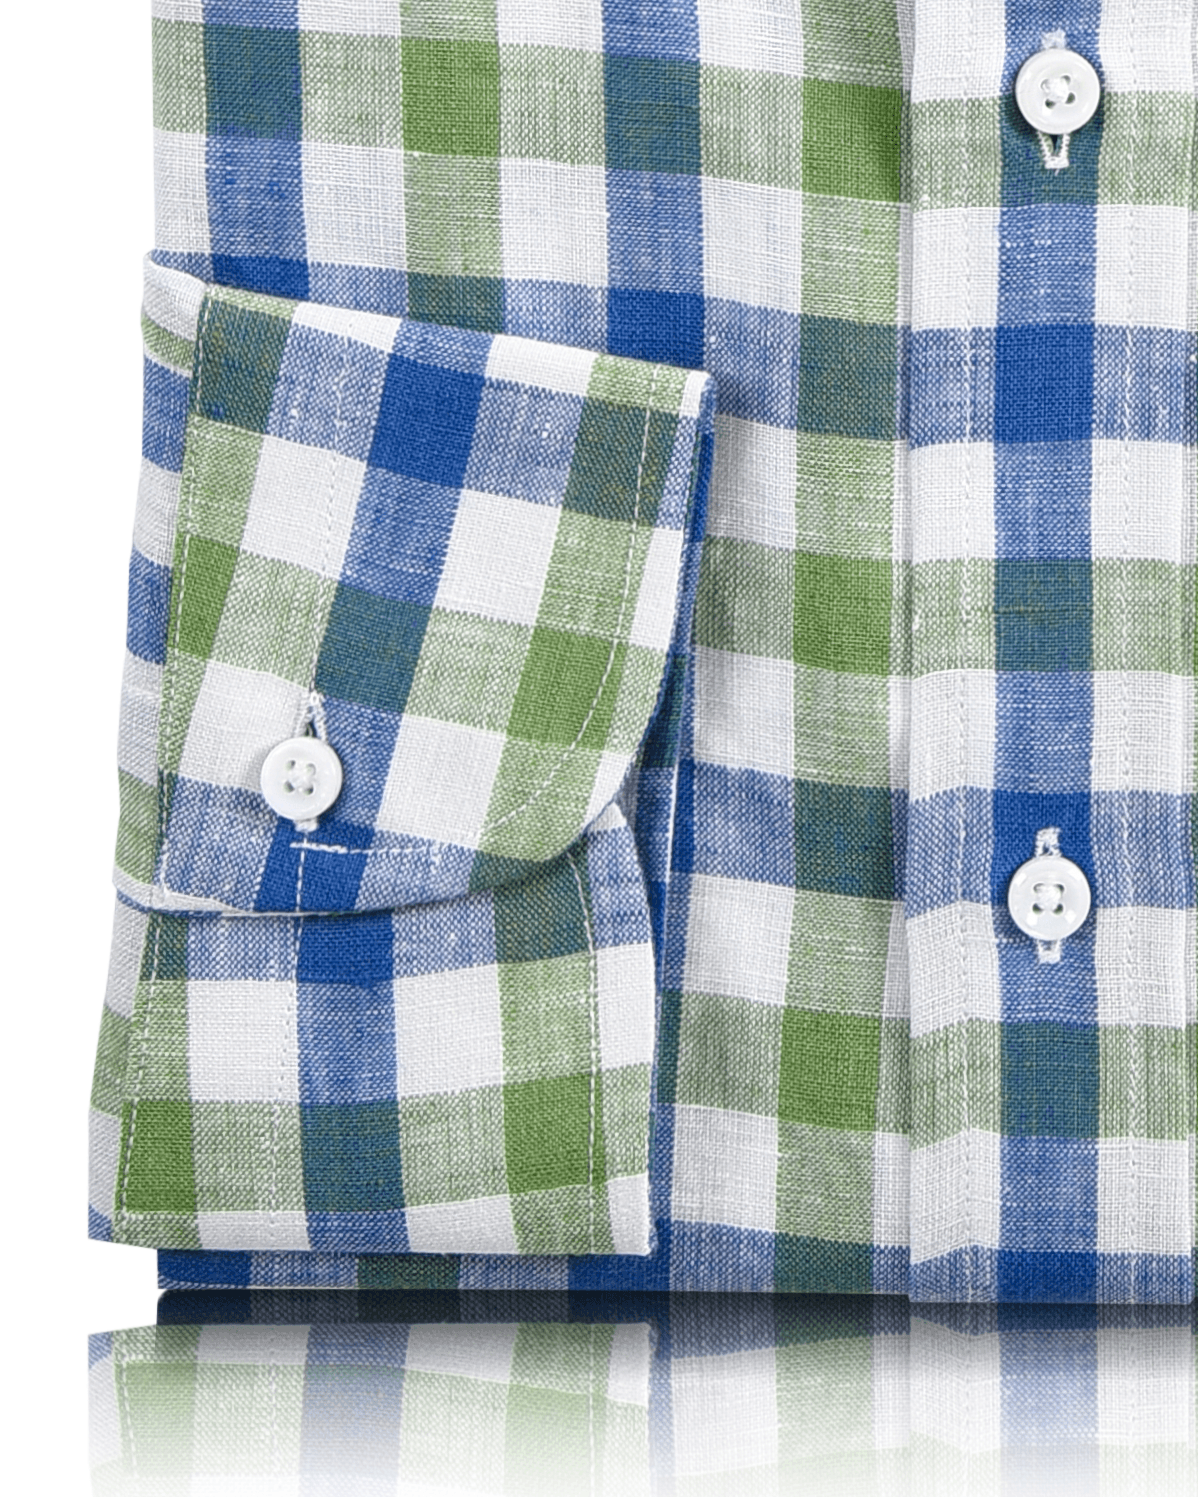 Cuff of custom linen shirt for men by Luxire in green and blue gingham